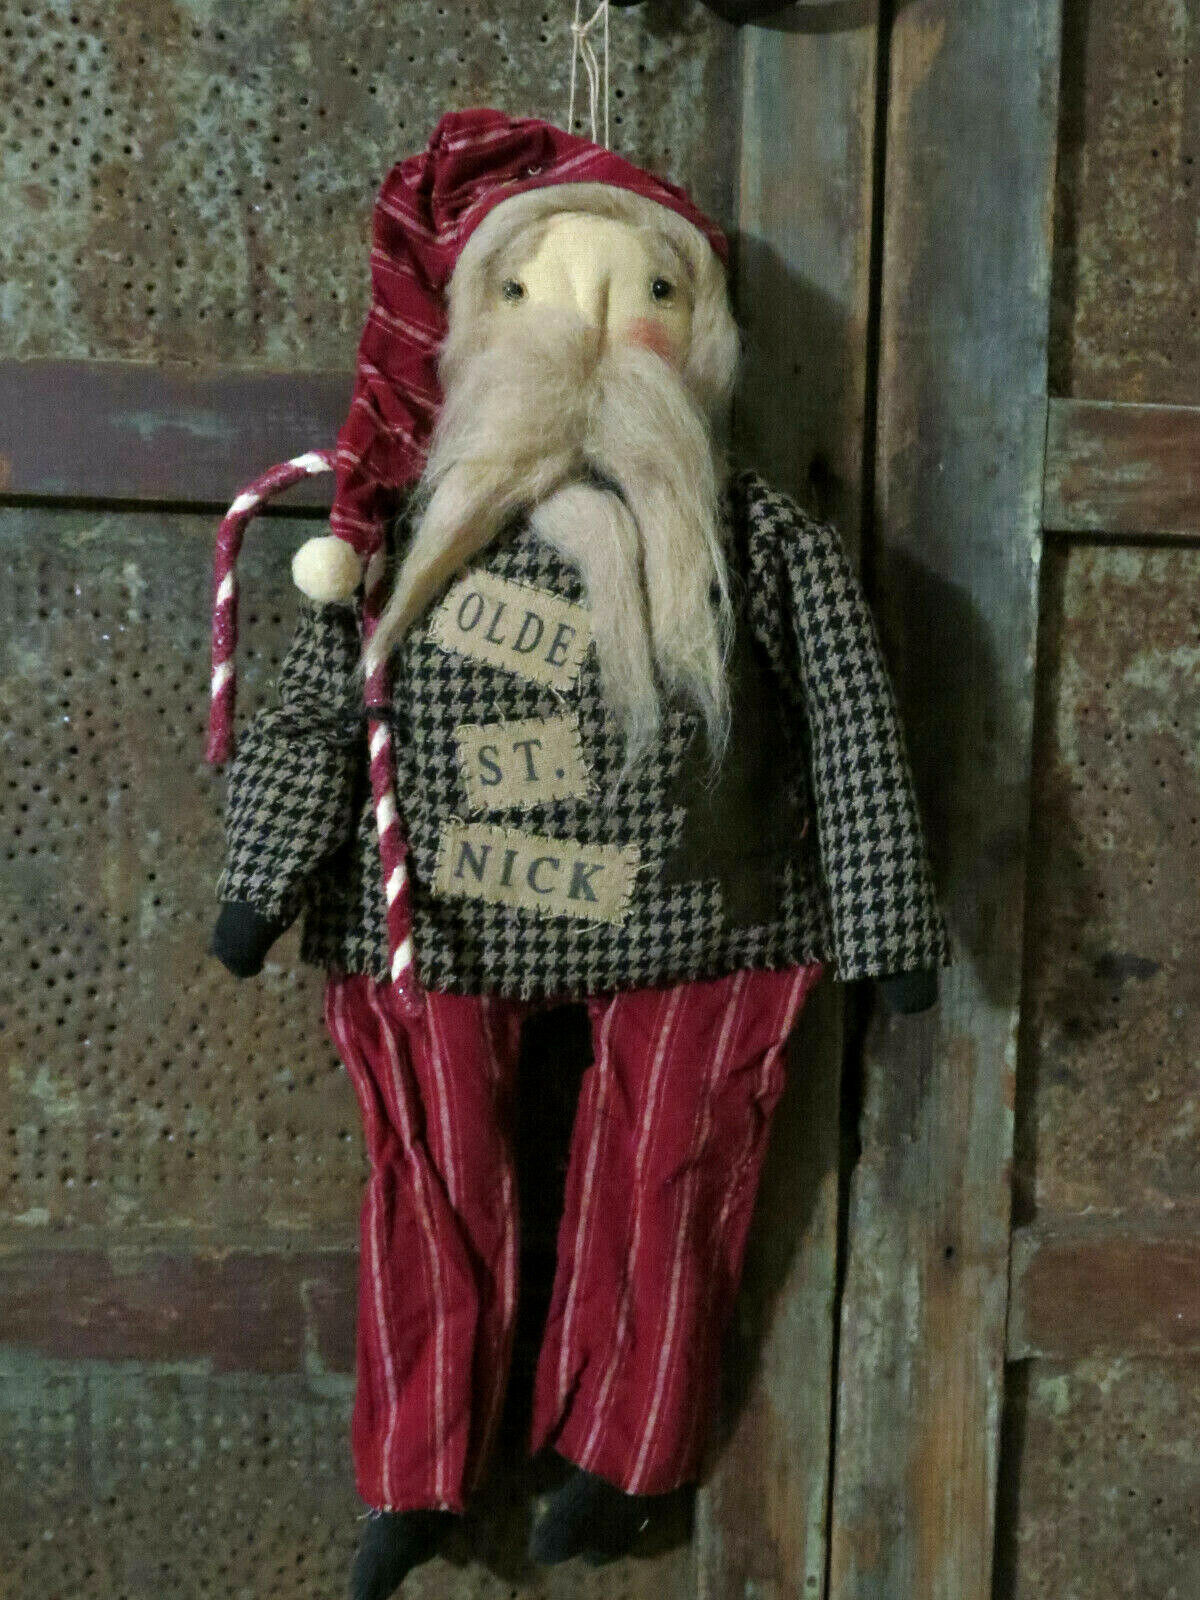 Grubby Primitive Old World Santa Claus Doll Tea Stained St Nick w Candy Cane